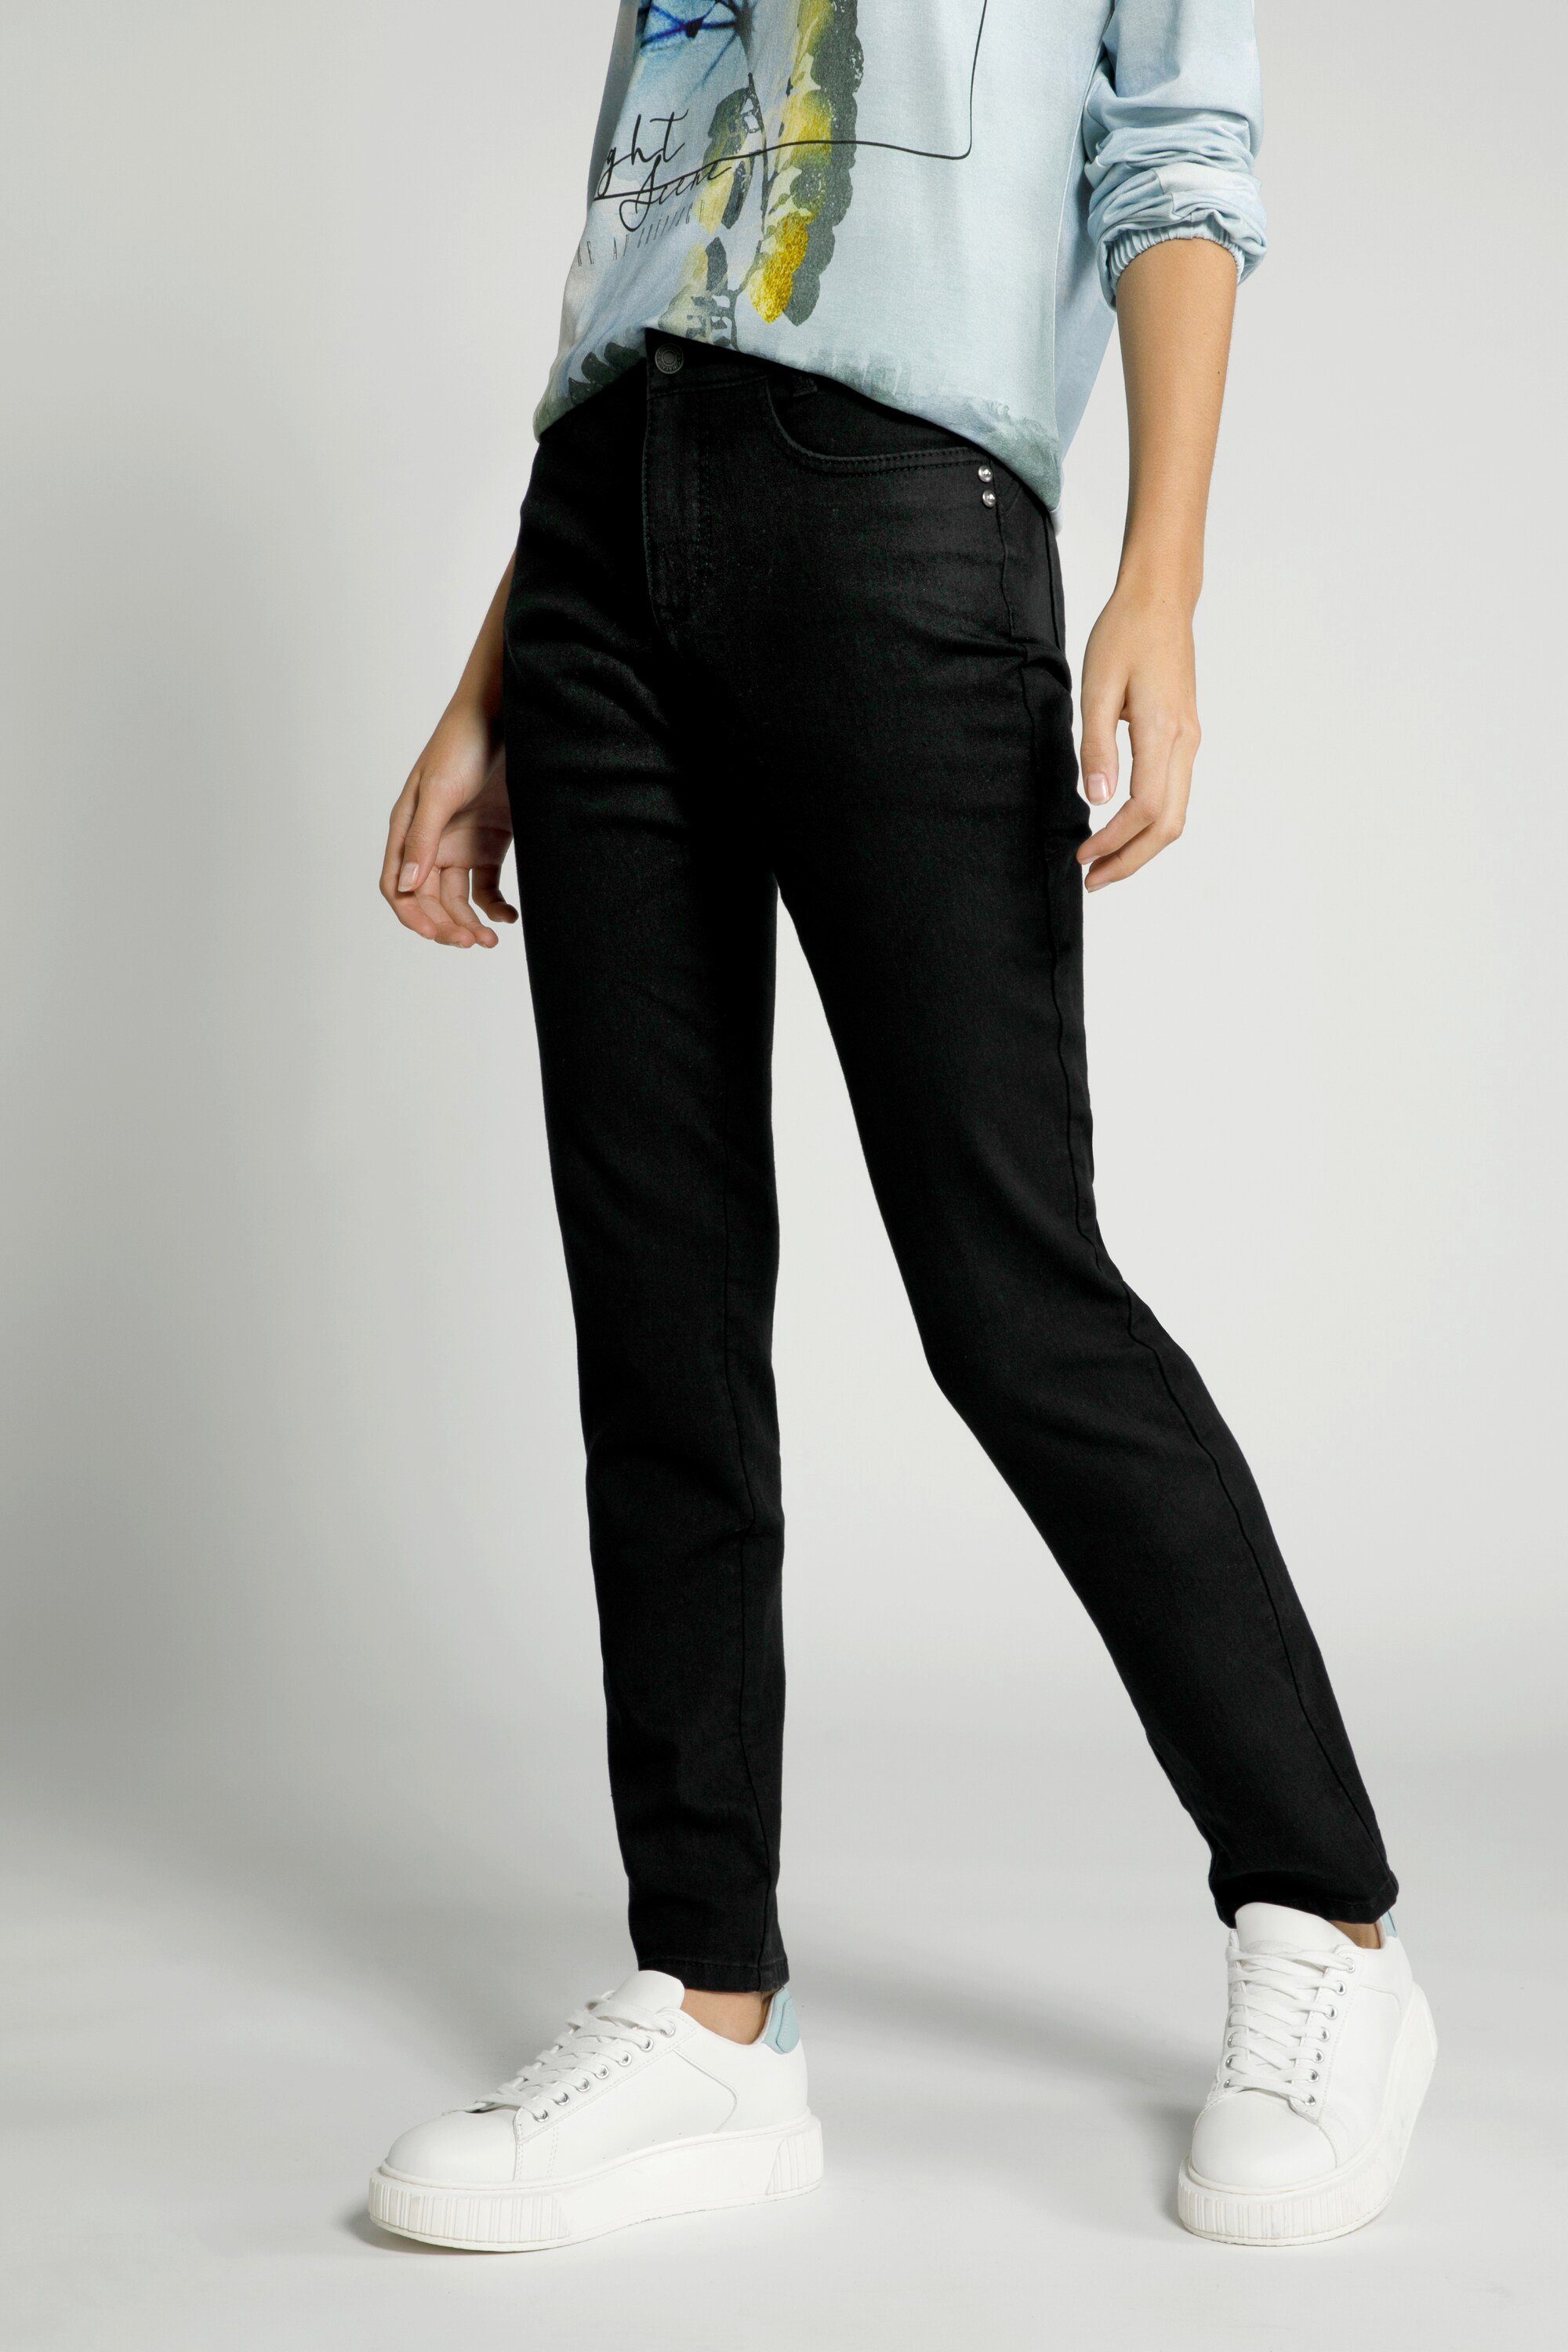 Gina Laura Regular-fit-Jeans Jeans Tina mit Biobaumwolle 5-Pocket | Straight-Fit Jeans